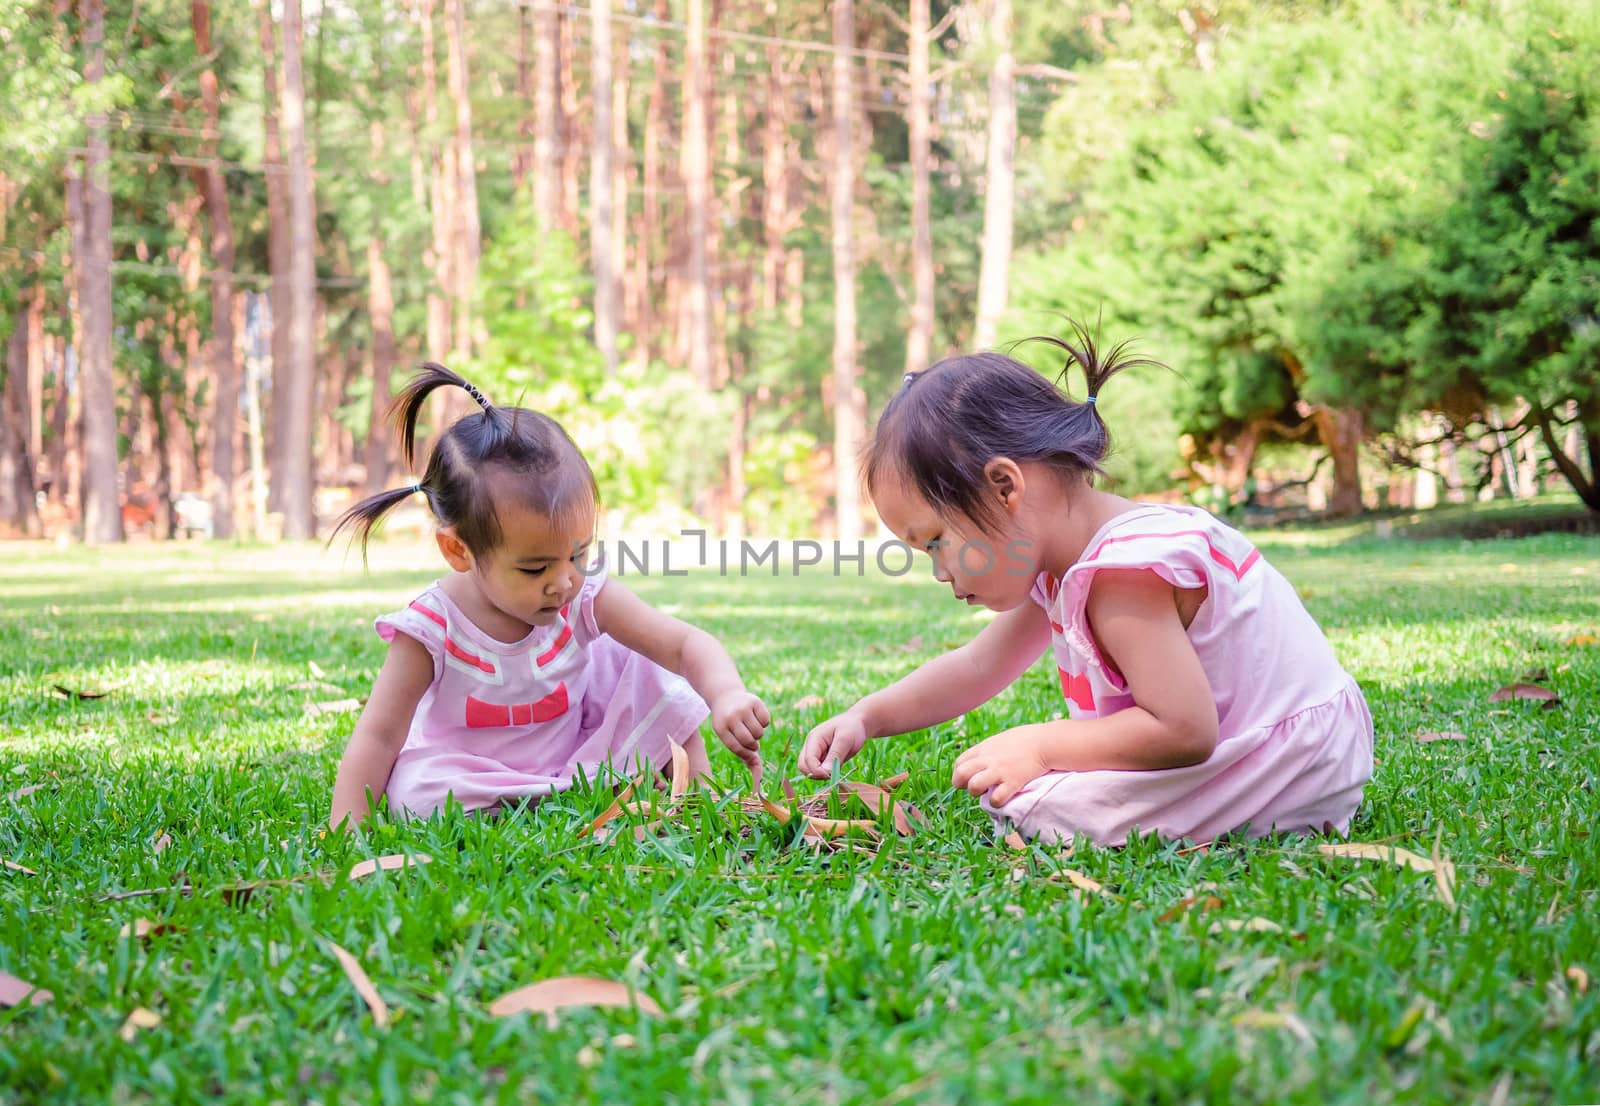 Asian little girls sit playing on grasses together happiness over nature background. Playing is learning for children.